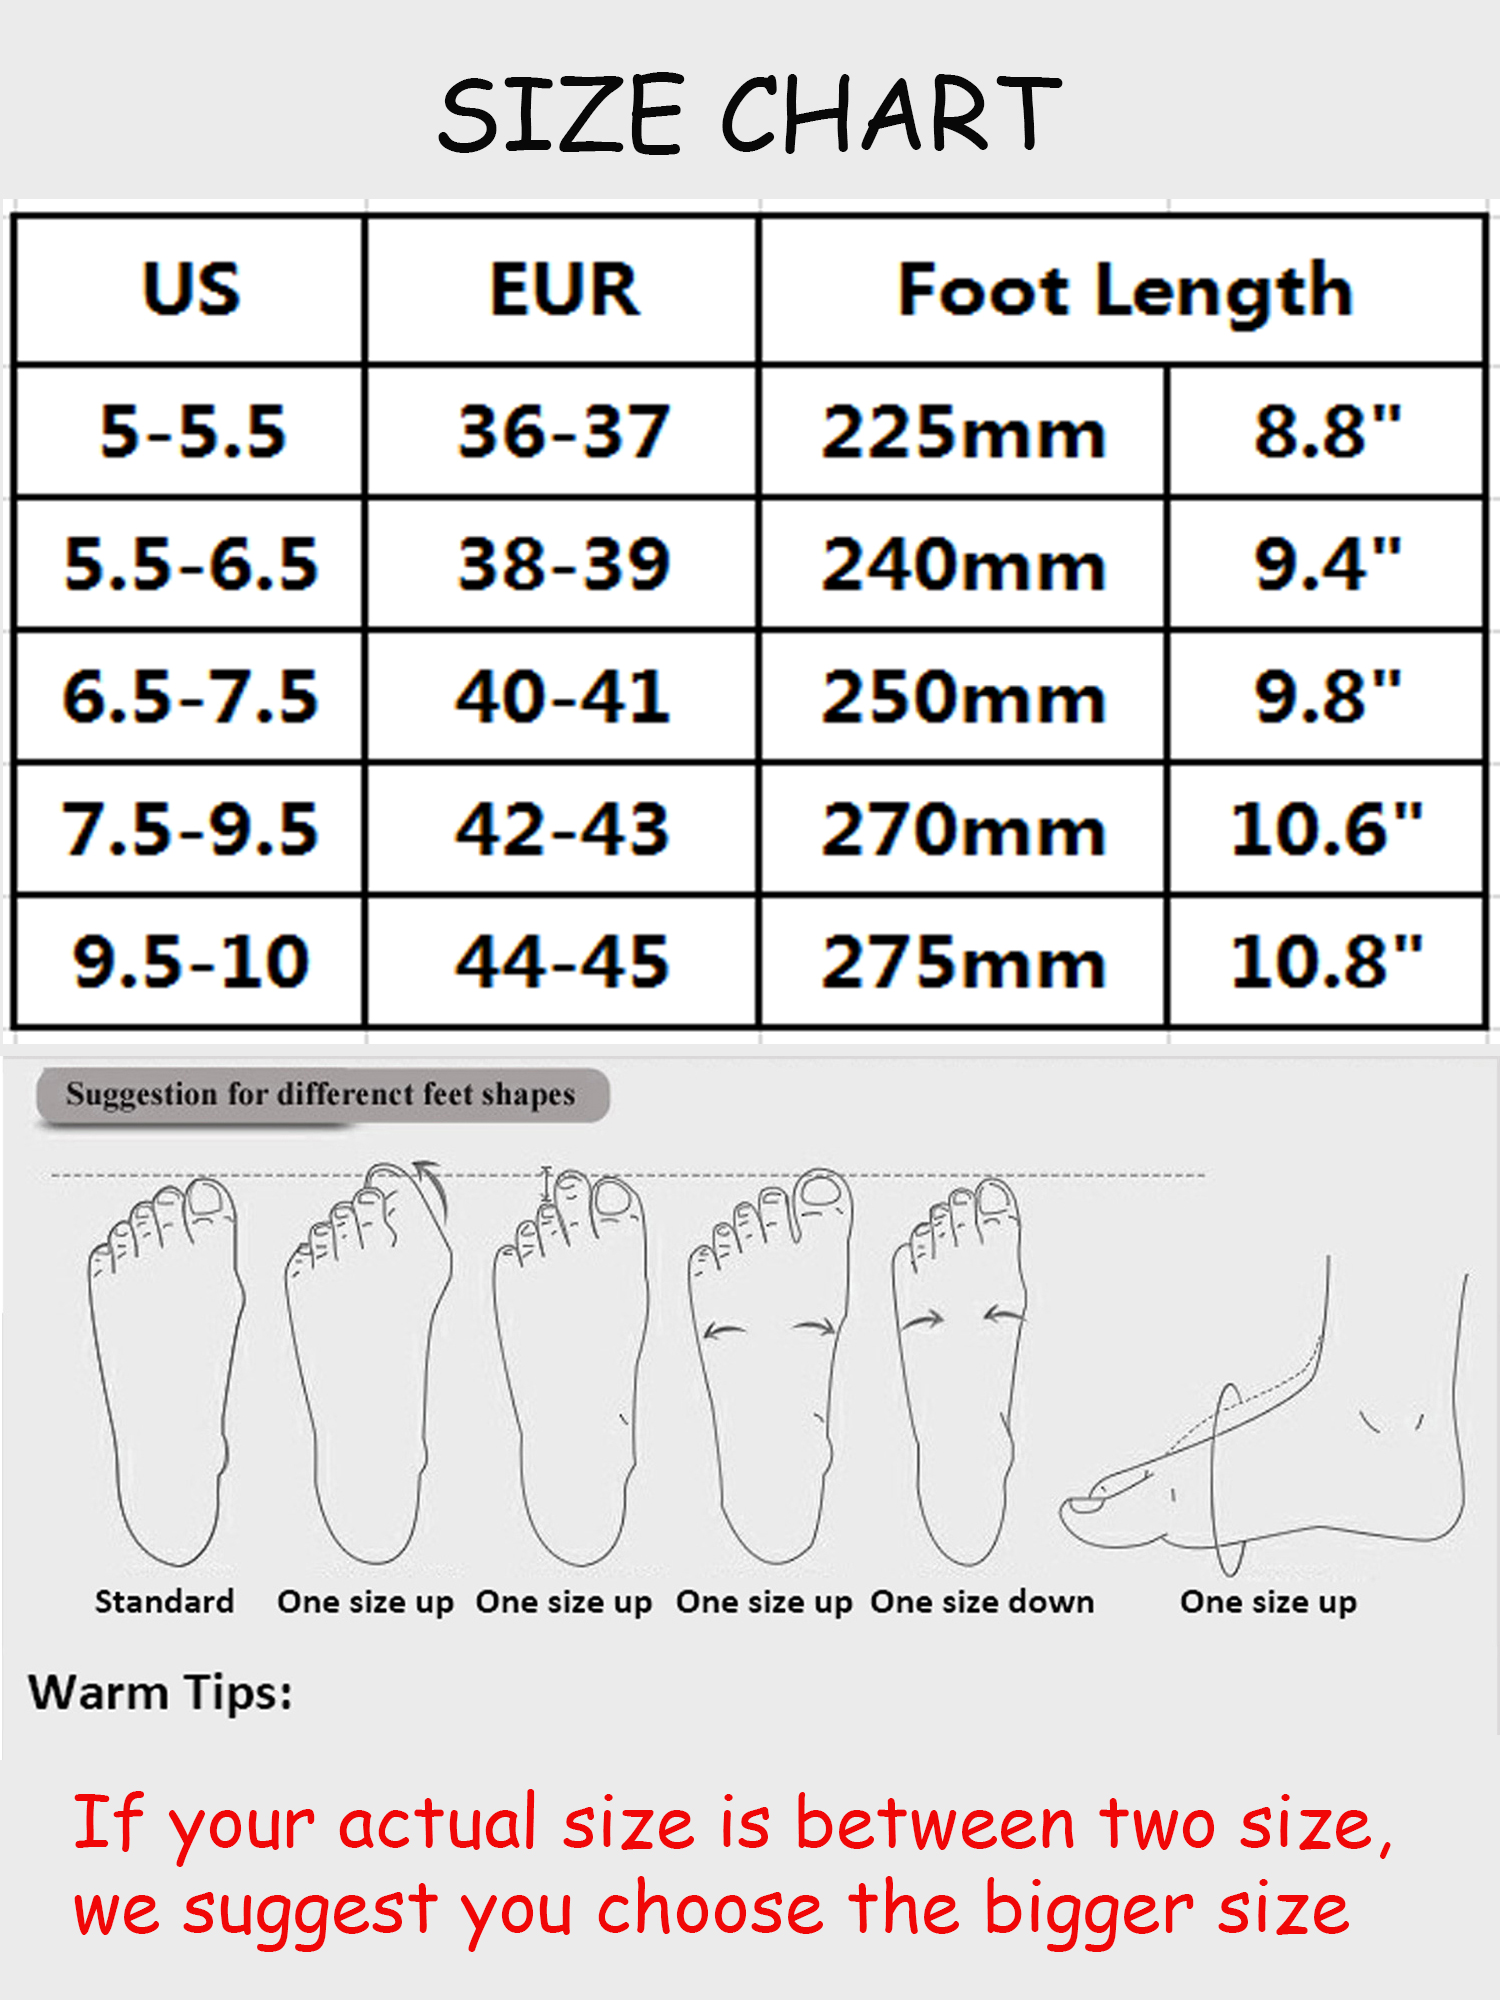 LELINTA Water Shoes for Mens Summer Barefoot Shoes Quick Dry Aqua Socks for Beach Swim Yoga Exercise - image 3 of 8